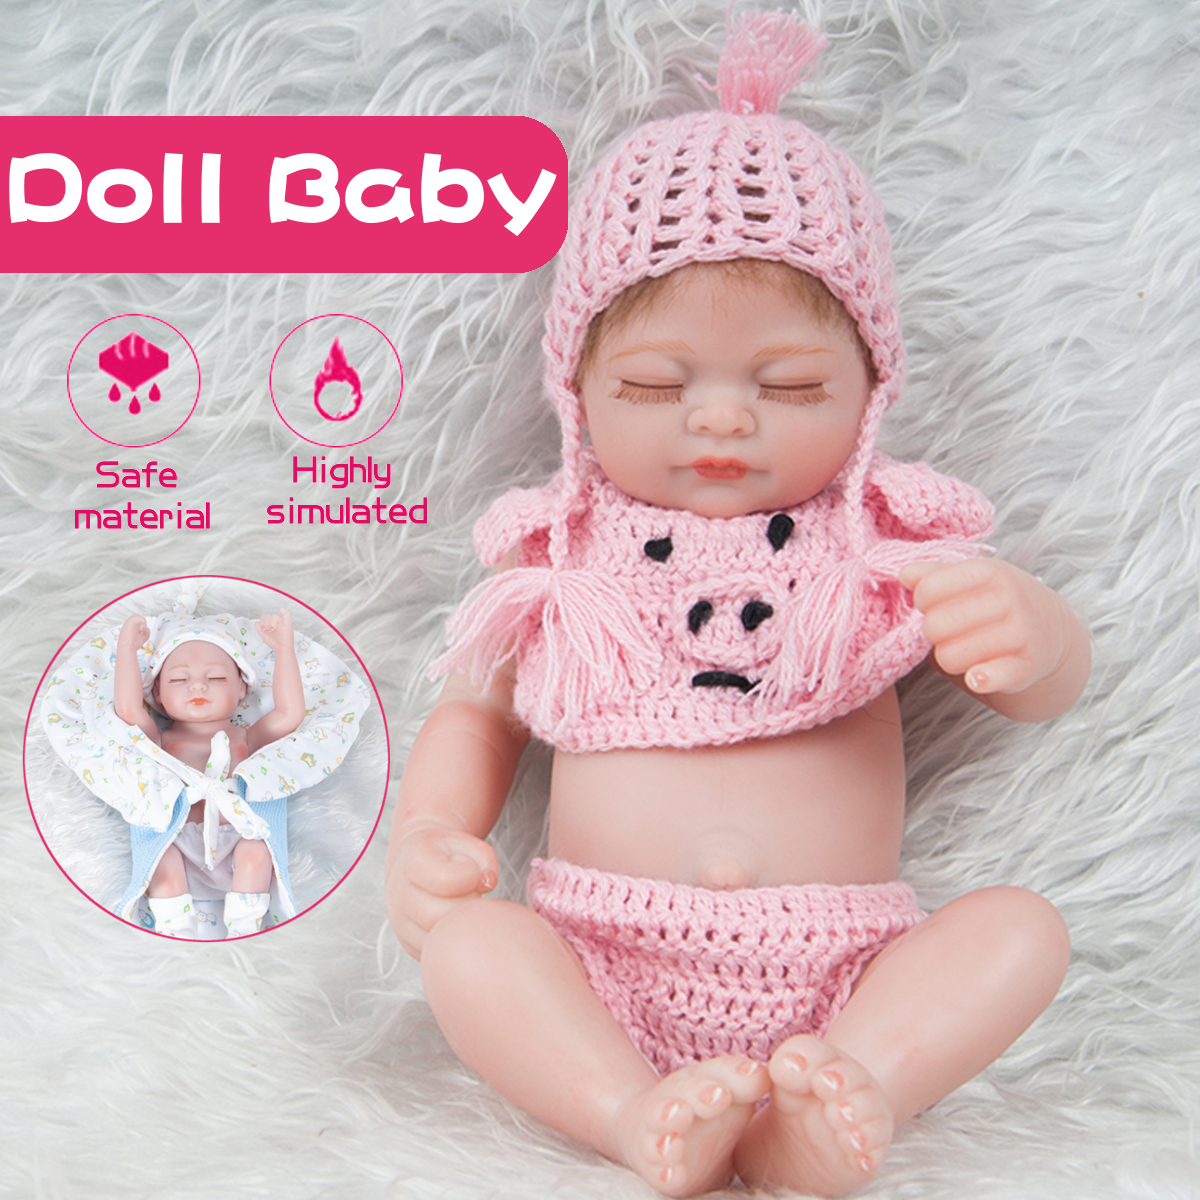 28CM-Soft-Silicone-Vinyl-Realistic-Sleeping-Reborn-Lifelike-Newborn-Baby-Doll-Toy-with-Moveable-Head-1731373-1